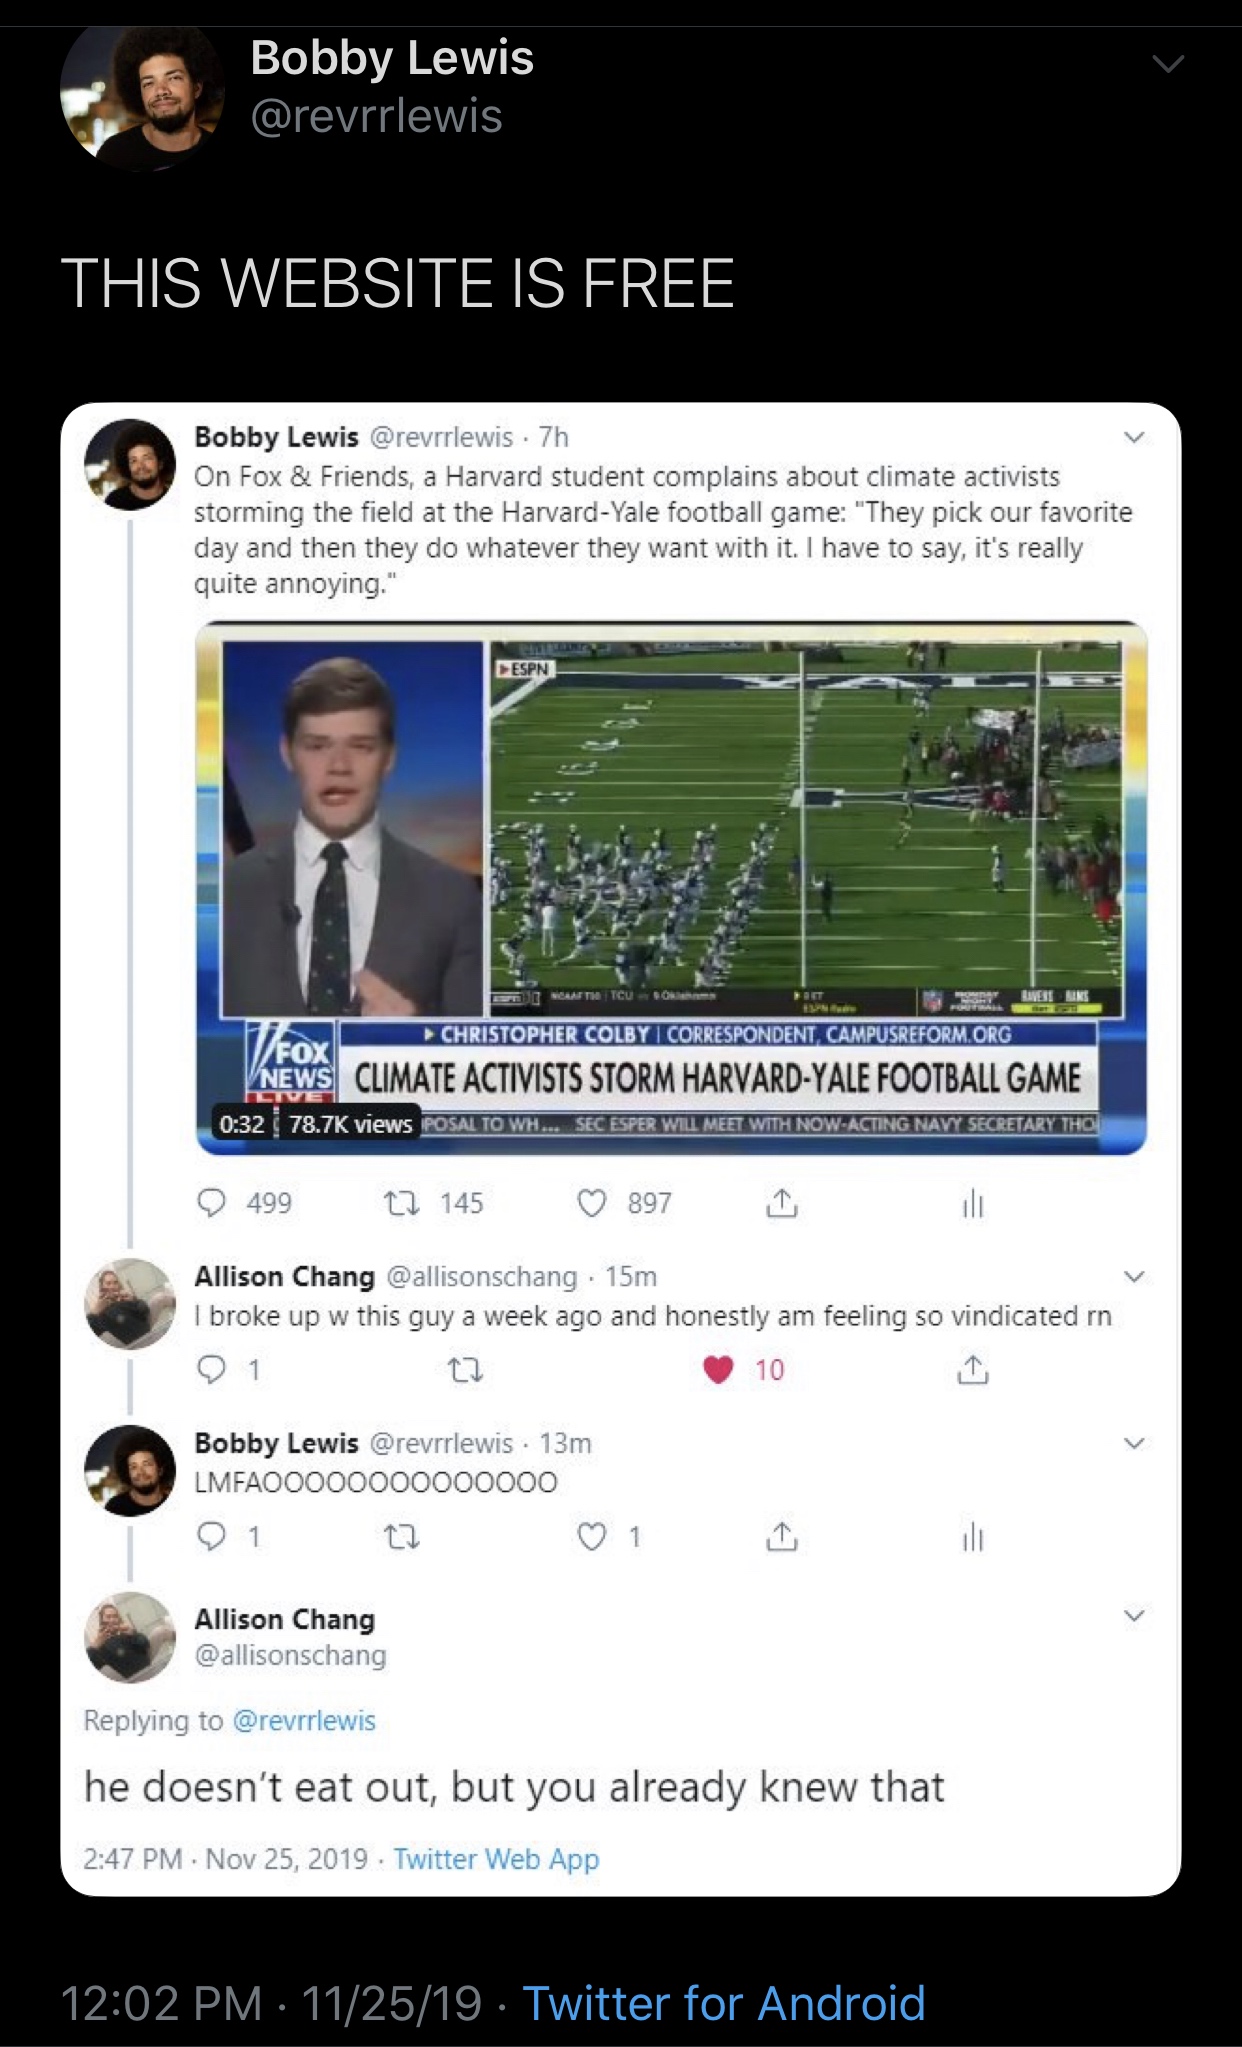 meme - screenshot - Bobby Lewis Bobby Lewis This Website Is Free Bobby low Os Fondant combo oming the the m e They are Sayd then they do have they want with uning Zootectie News Climate Activists Storm HarvardYale Football Game Allison Chang c hang 5 I br